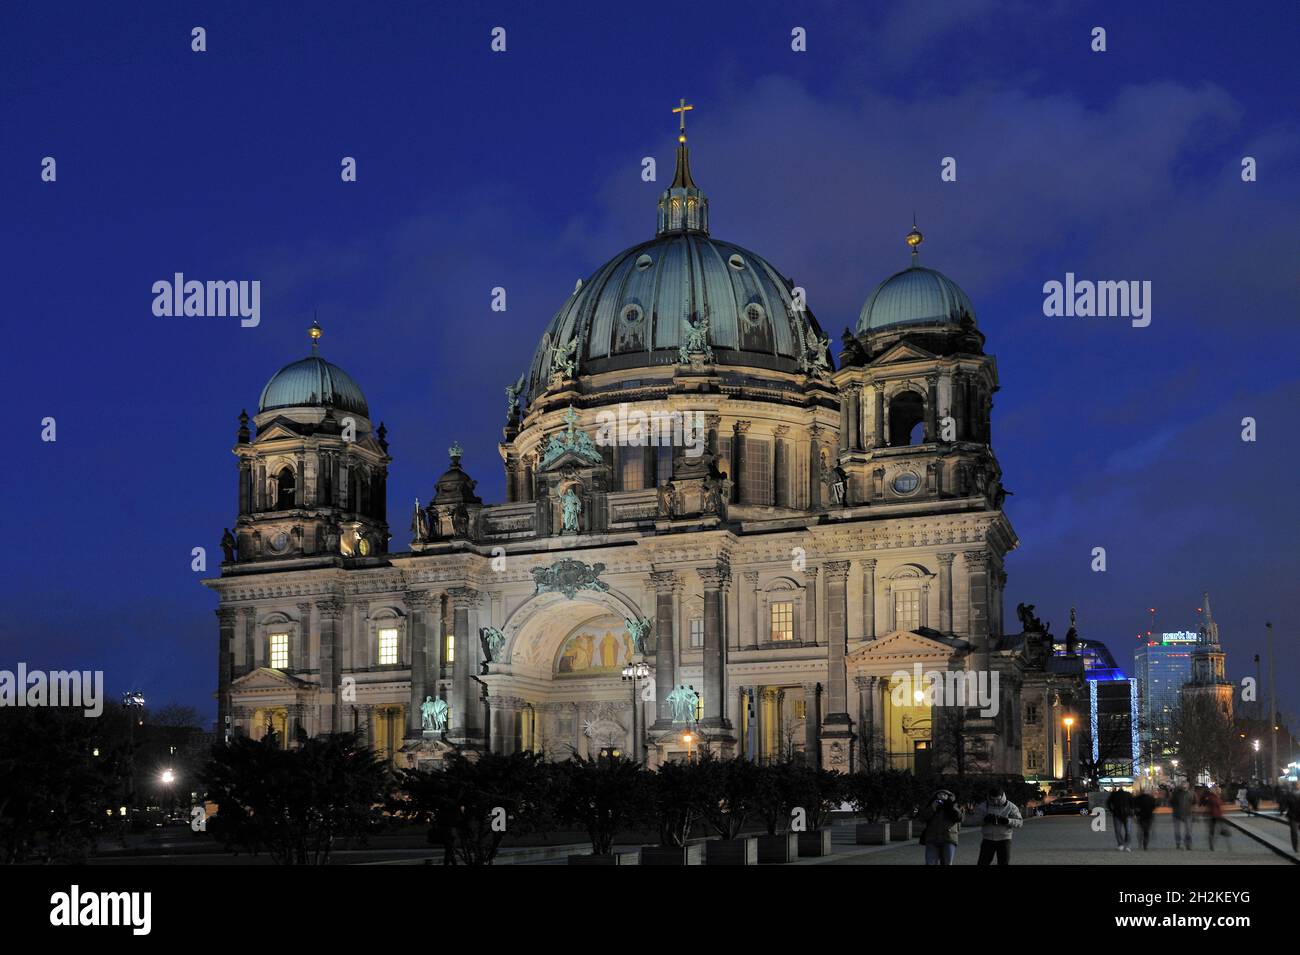 Berlin cathedral, view from the Lustgarten, pleasure ground, which is part of the Museum Island, built 1895-1905 bv Julius Raschdorff, Fernsehturm,  B Stock Photo